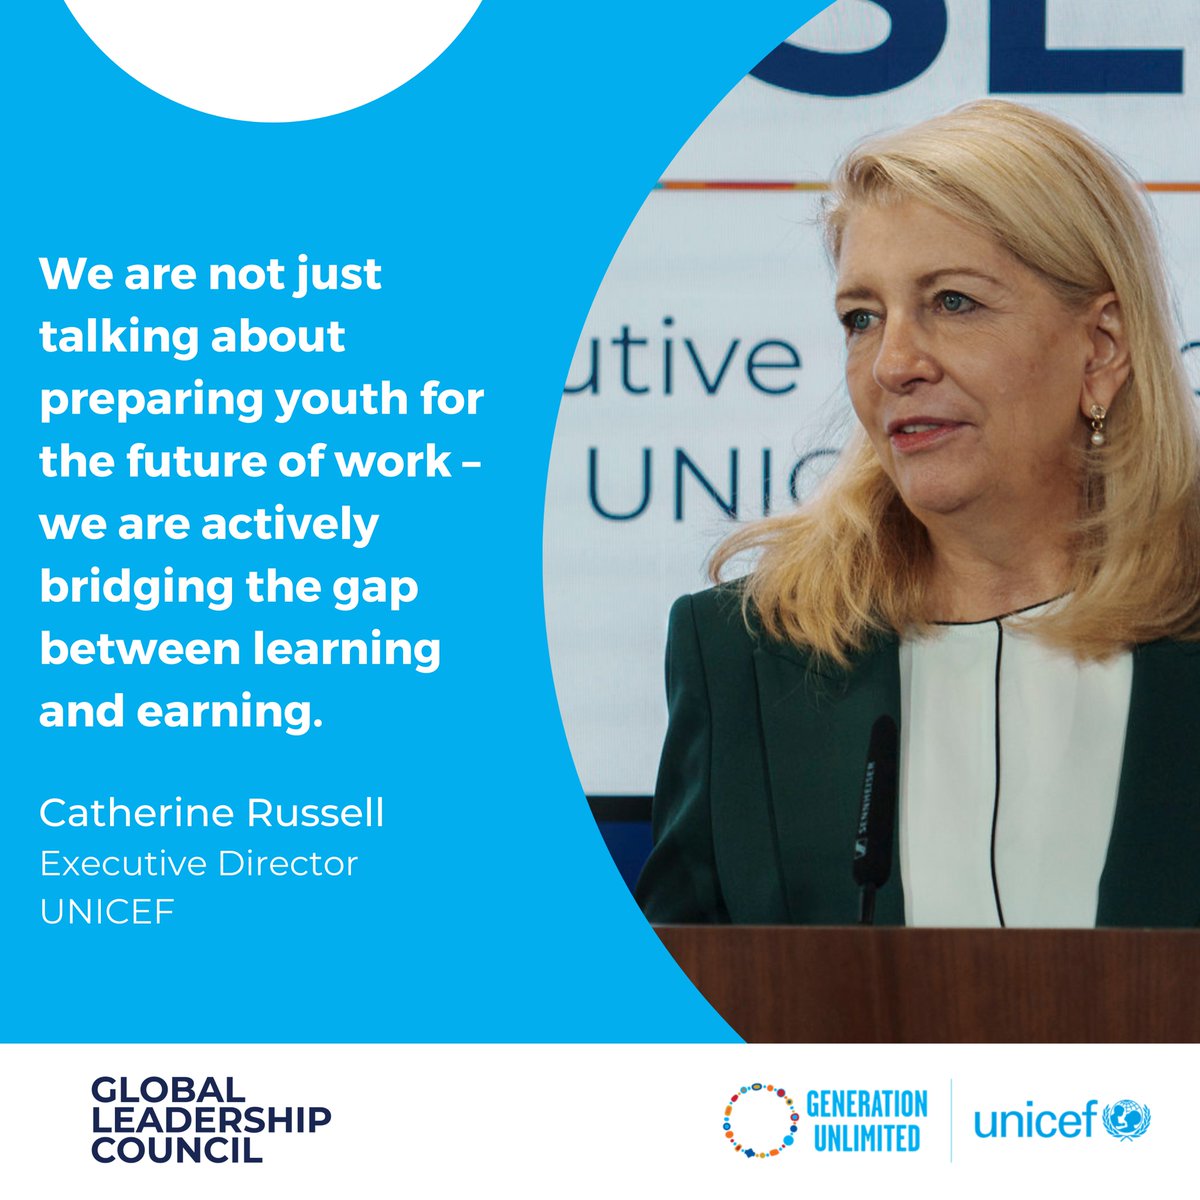 A shared commitment to connect learning to livelihood and today’s opportunities with tomorrow’s sustainable growth. @UNICEFChief shared how partnerships can drive results for youth at the @GenUnlimited_ Global Leadership Council. #SkillsRightNow